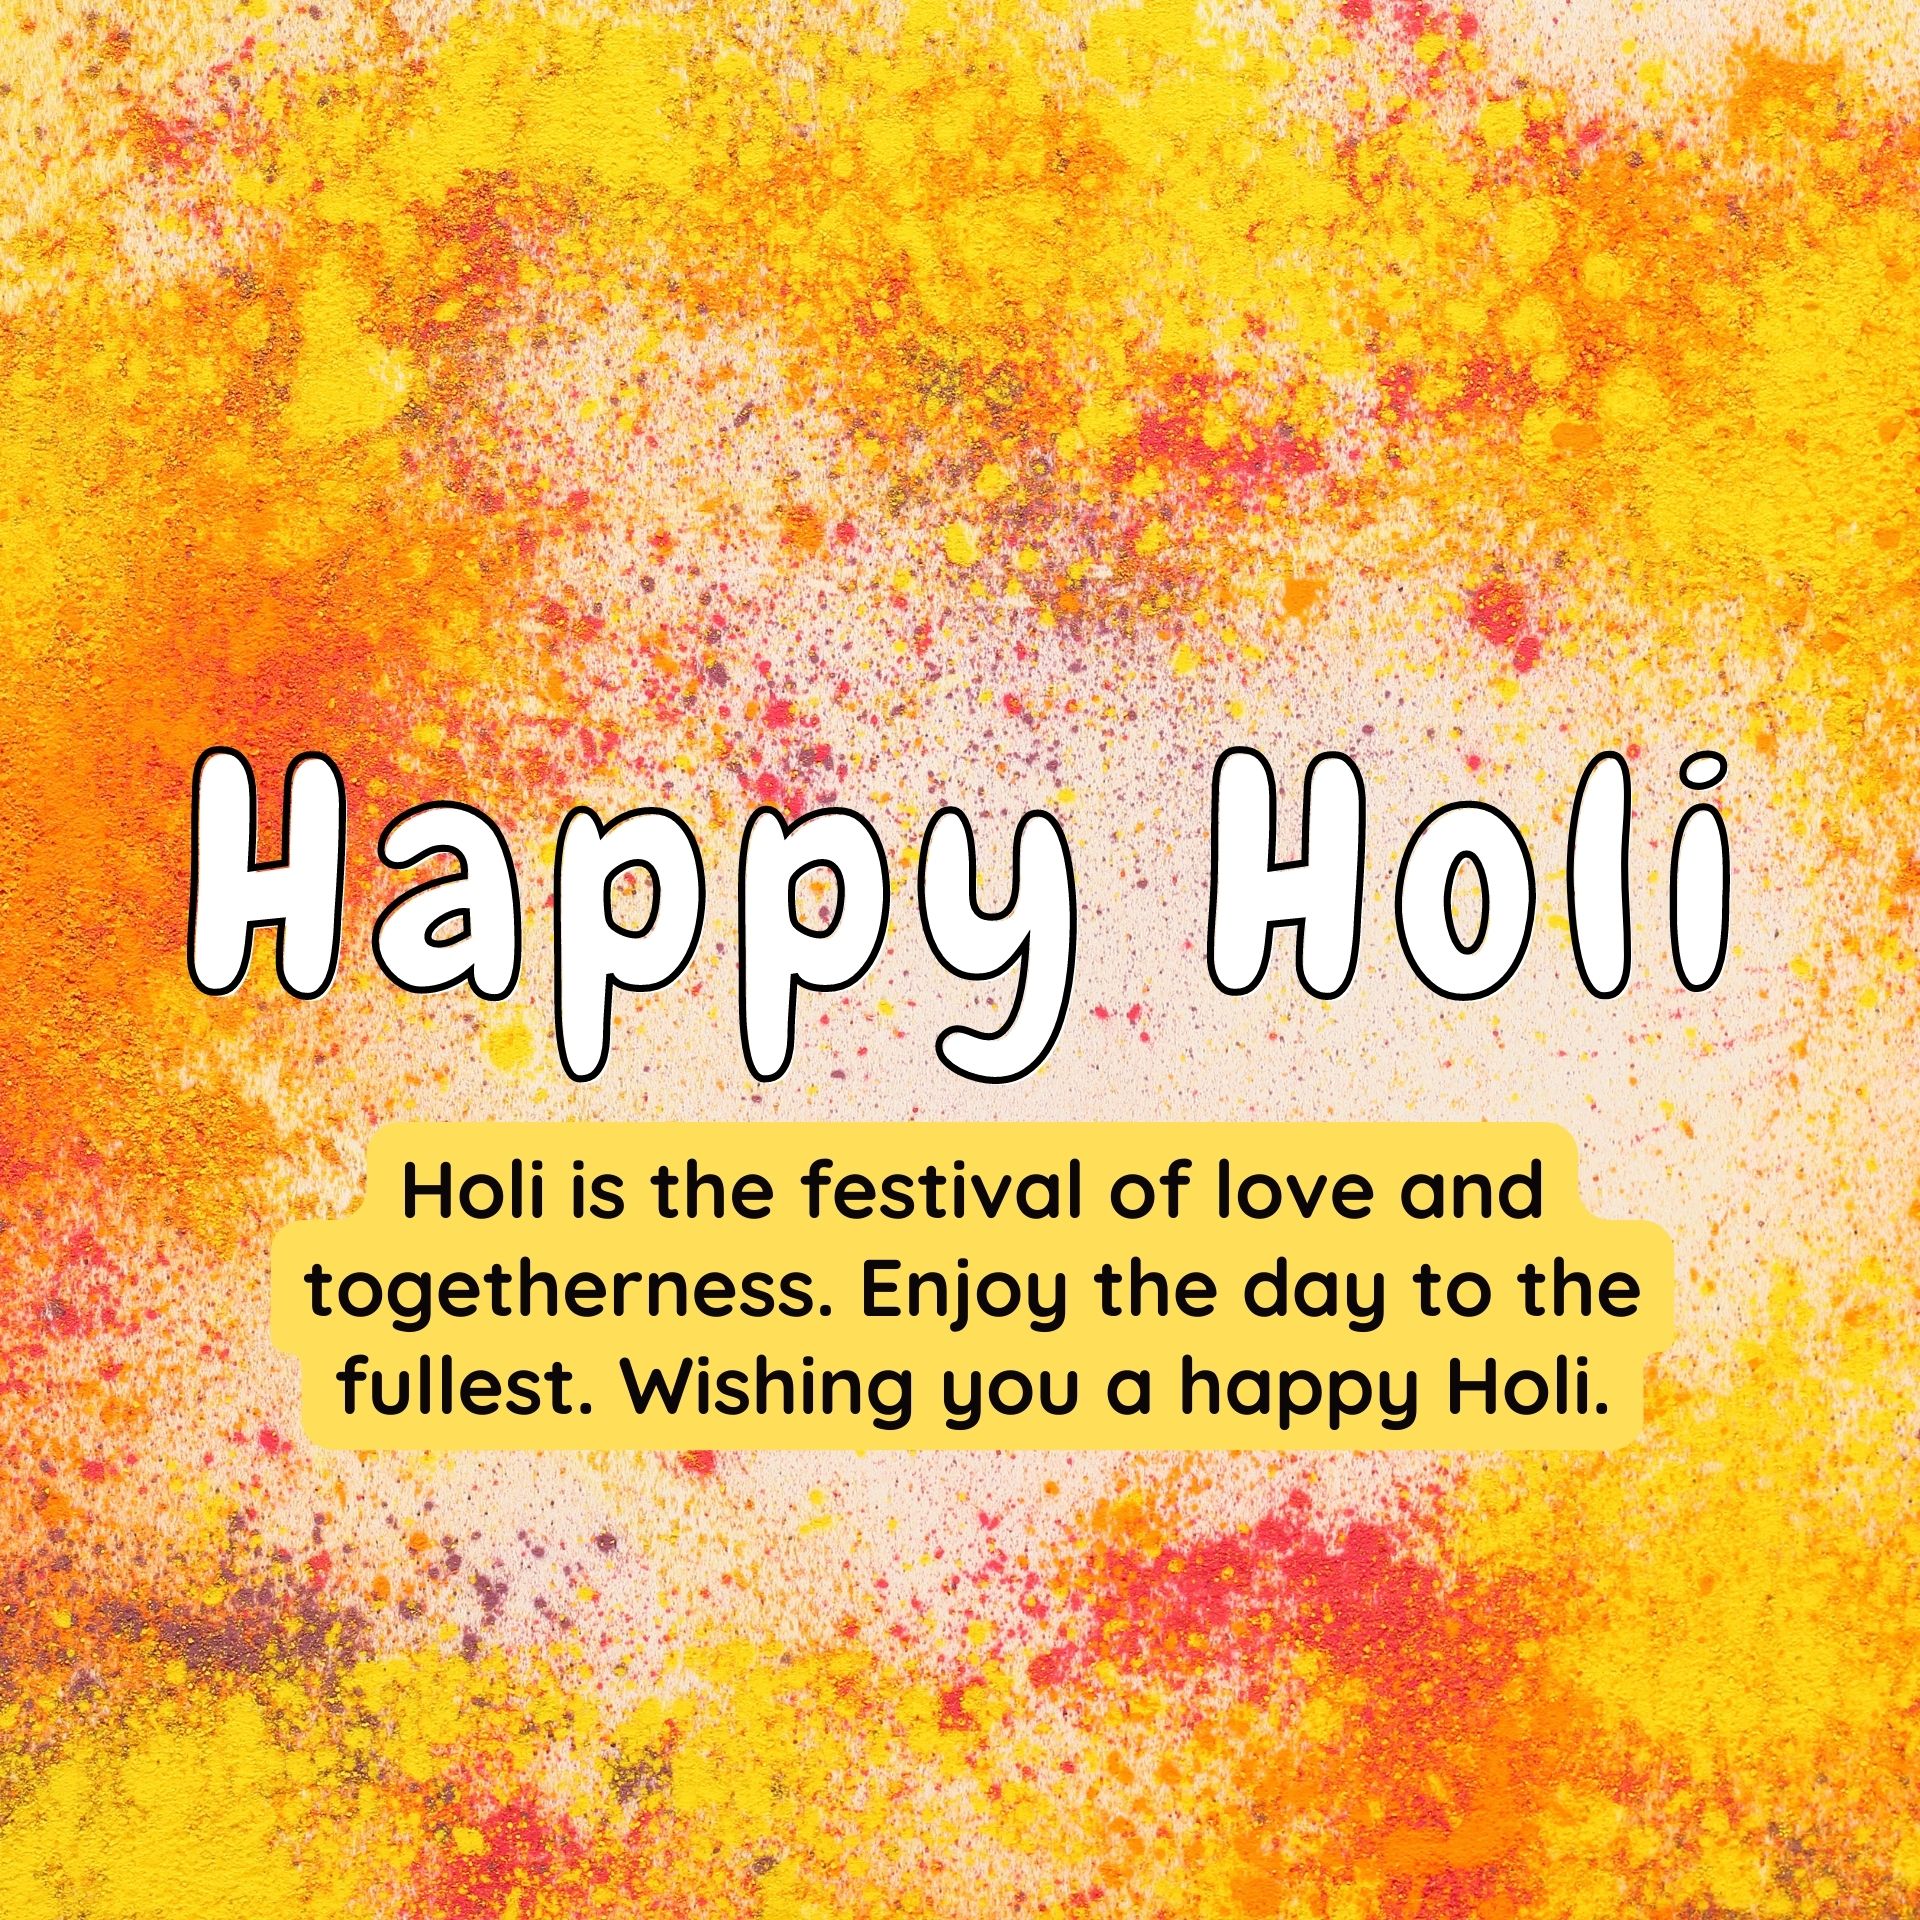 Happy Holi Wishes Images for Whatsapp